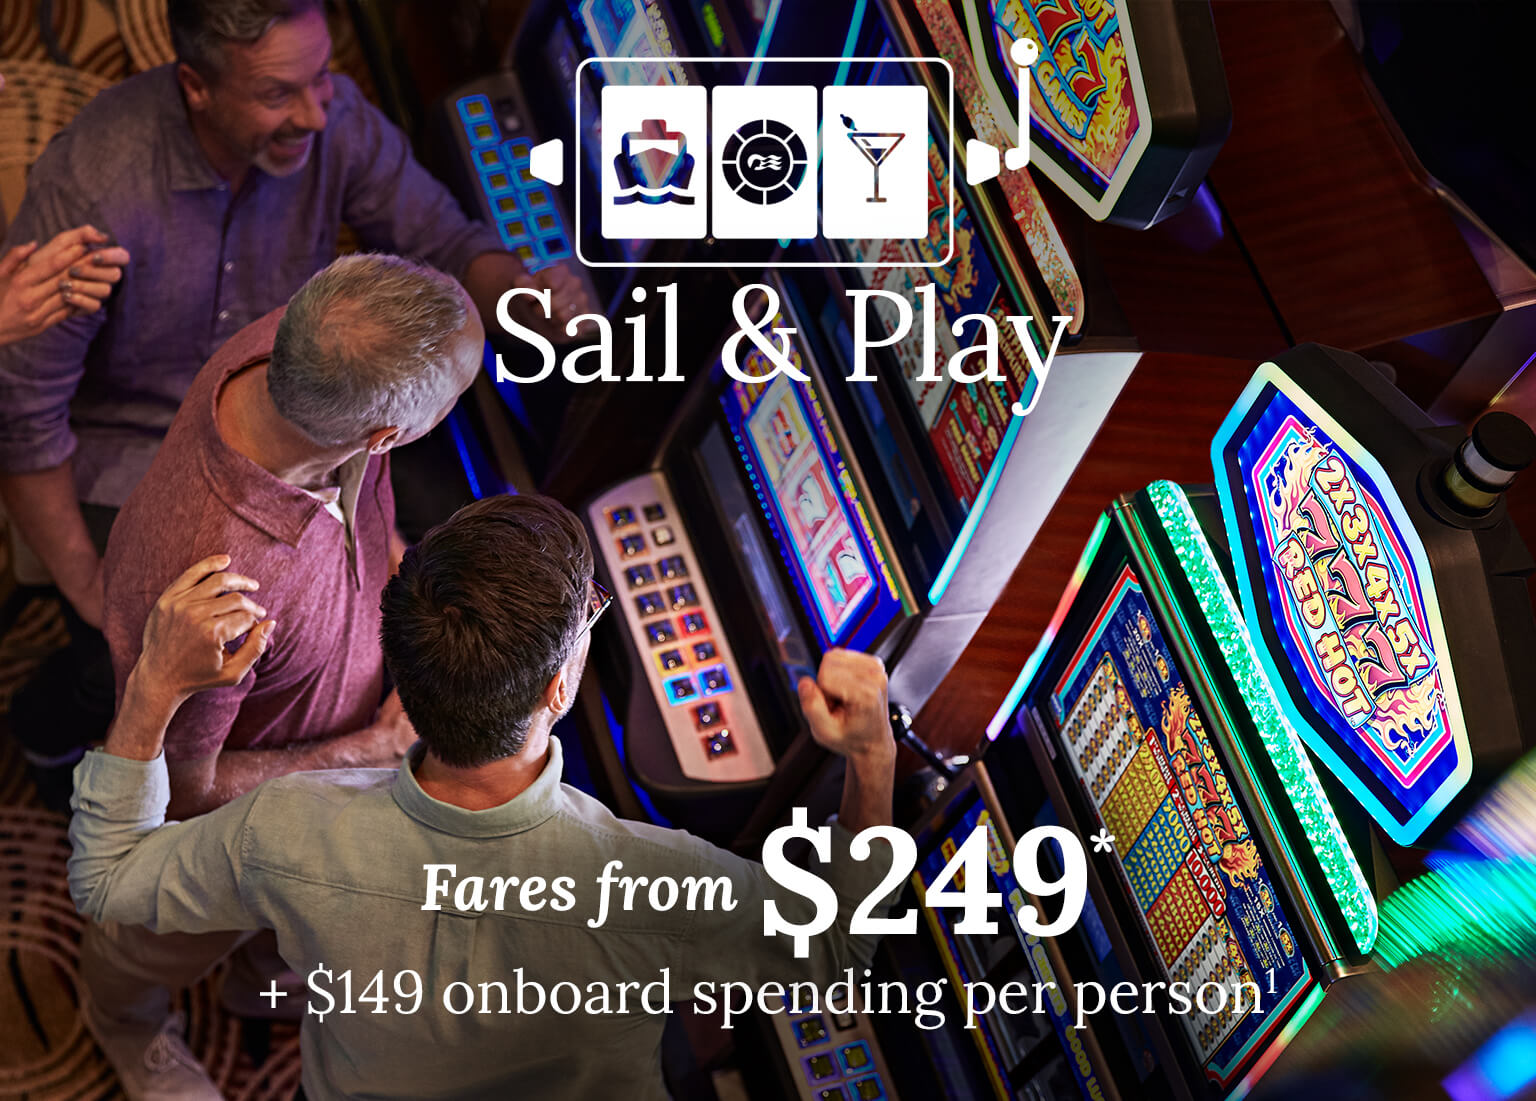 Group of people playing slots. fares from $249. $149 onboard spending per person on voyages 7 days or longer. Click here to book.